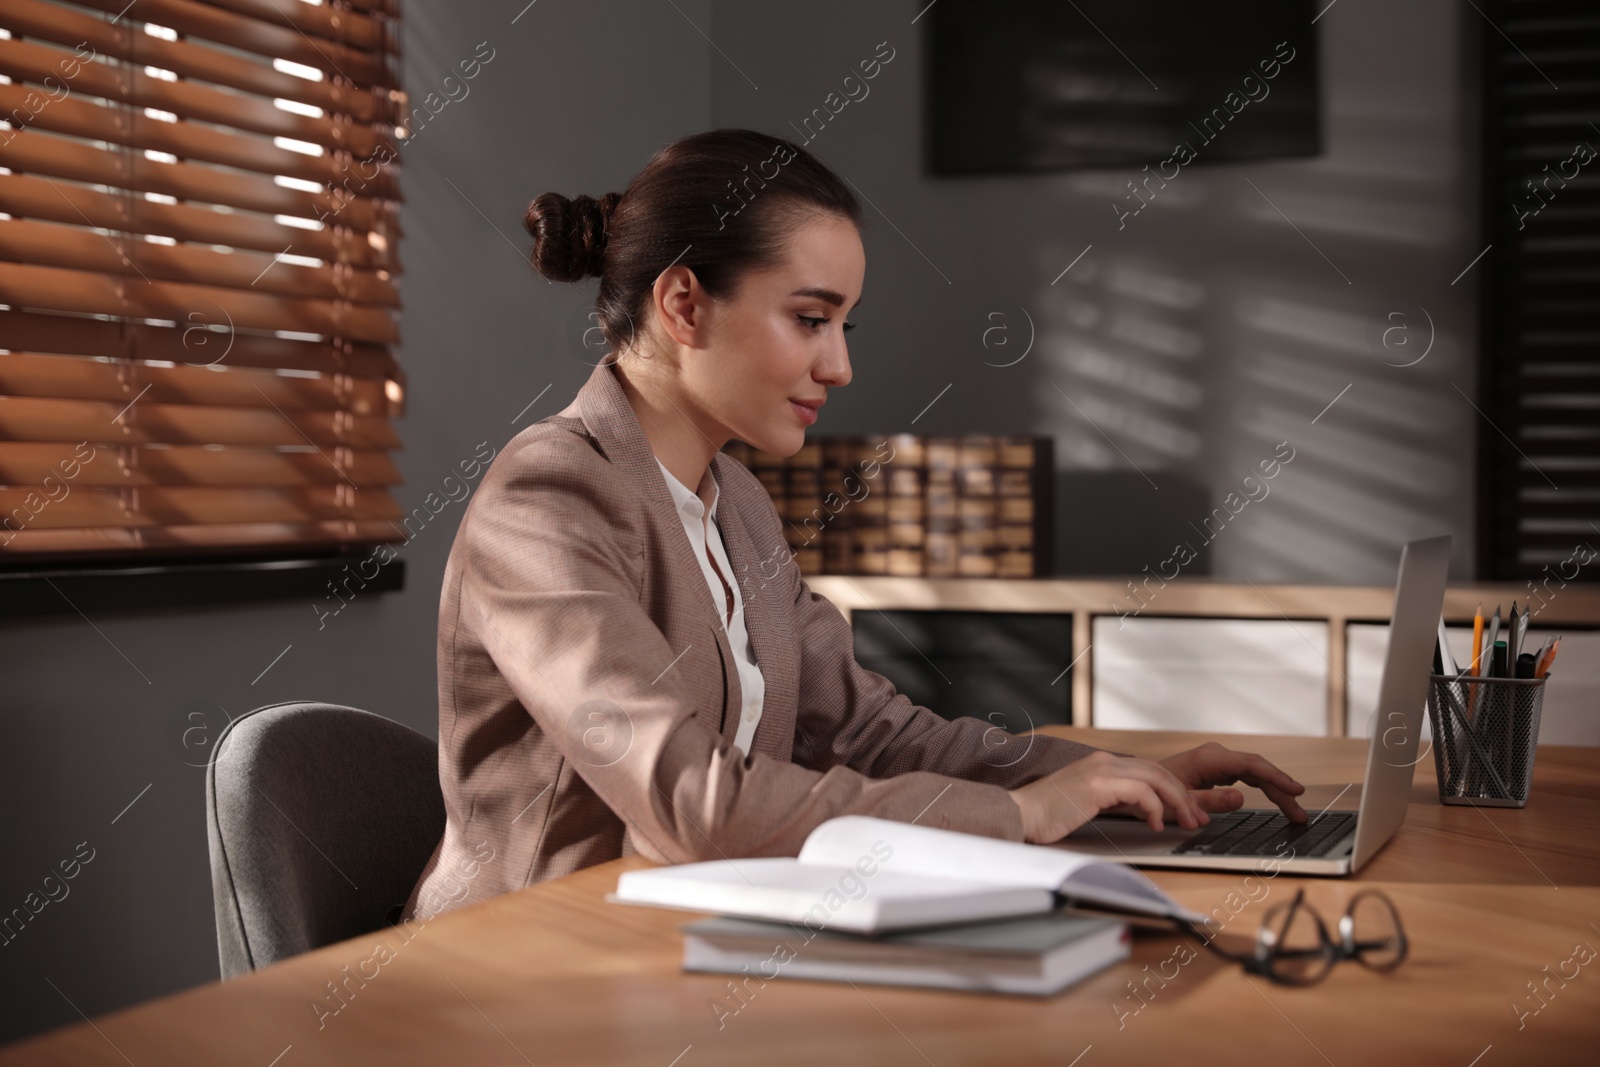 Photo of Woman working with laptop at wooden desk in office